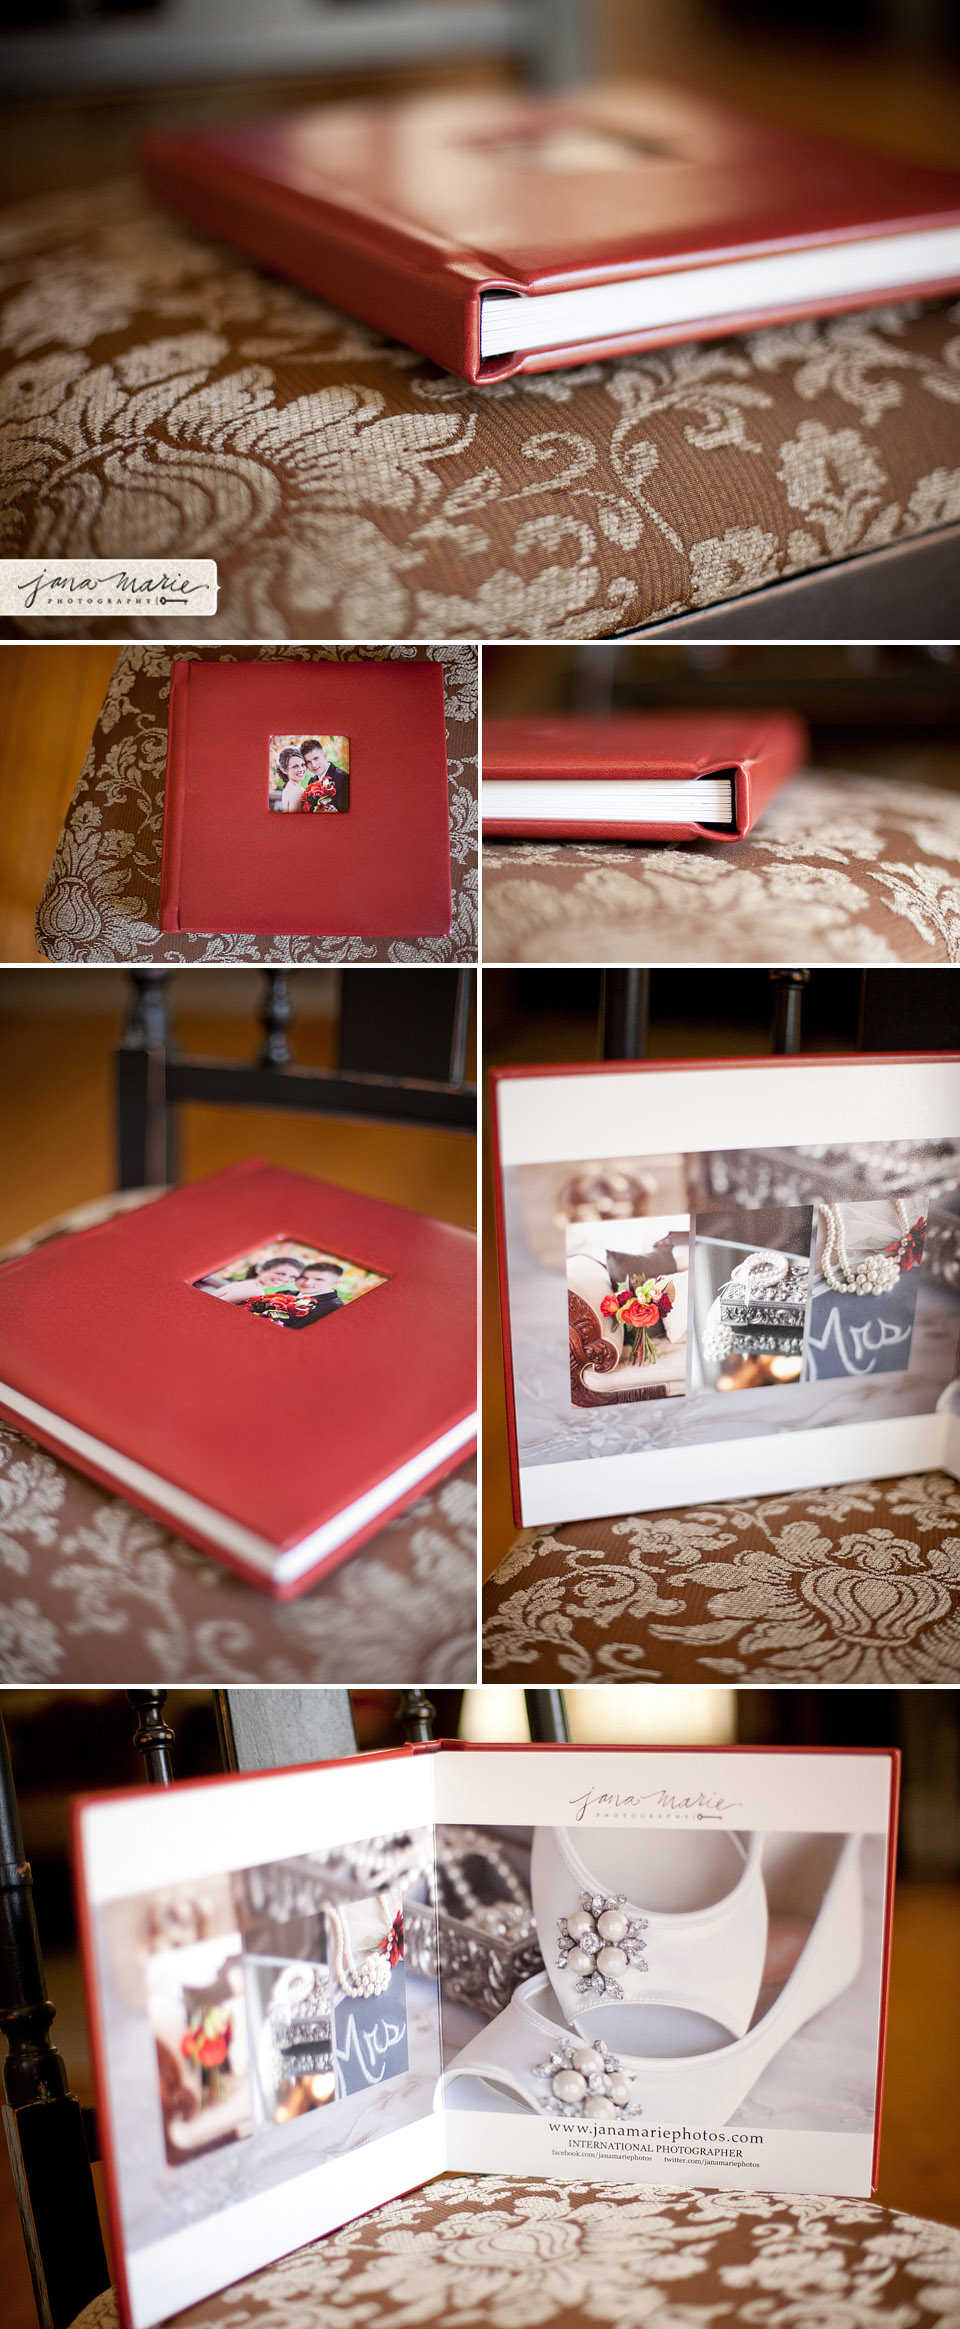 Renaissance Albums, Lay Flat albums, Red leather cover, Jana Marie Photos, Longview Mansion, Book samples